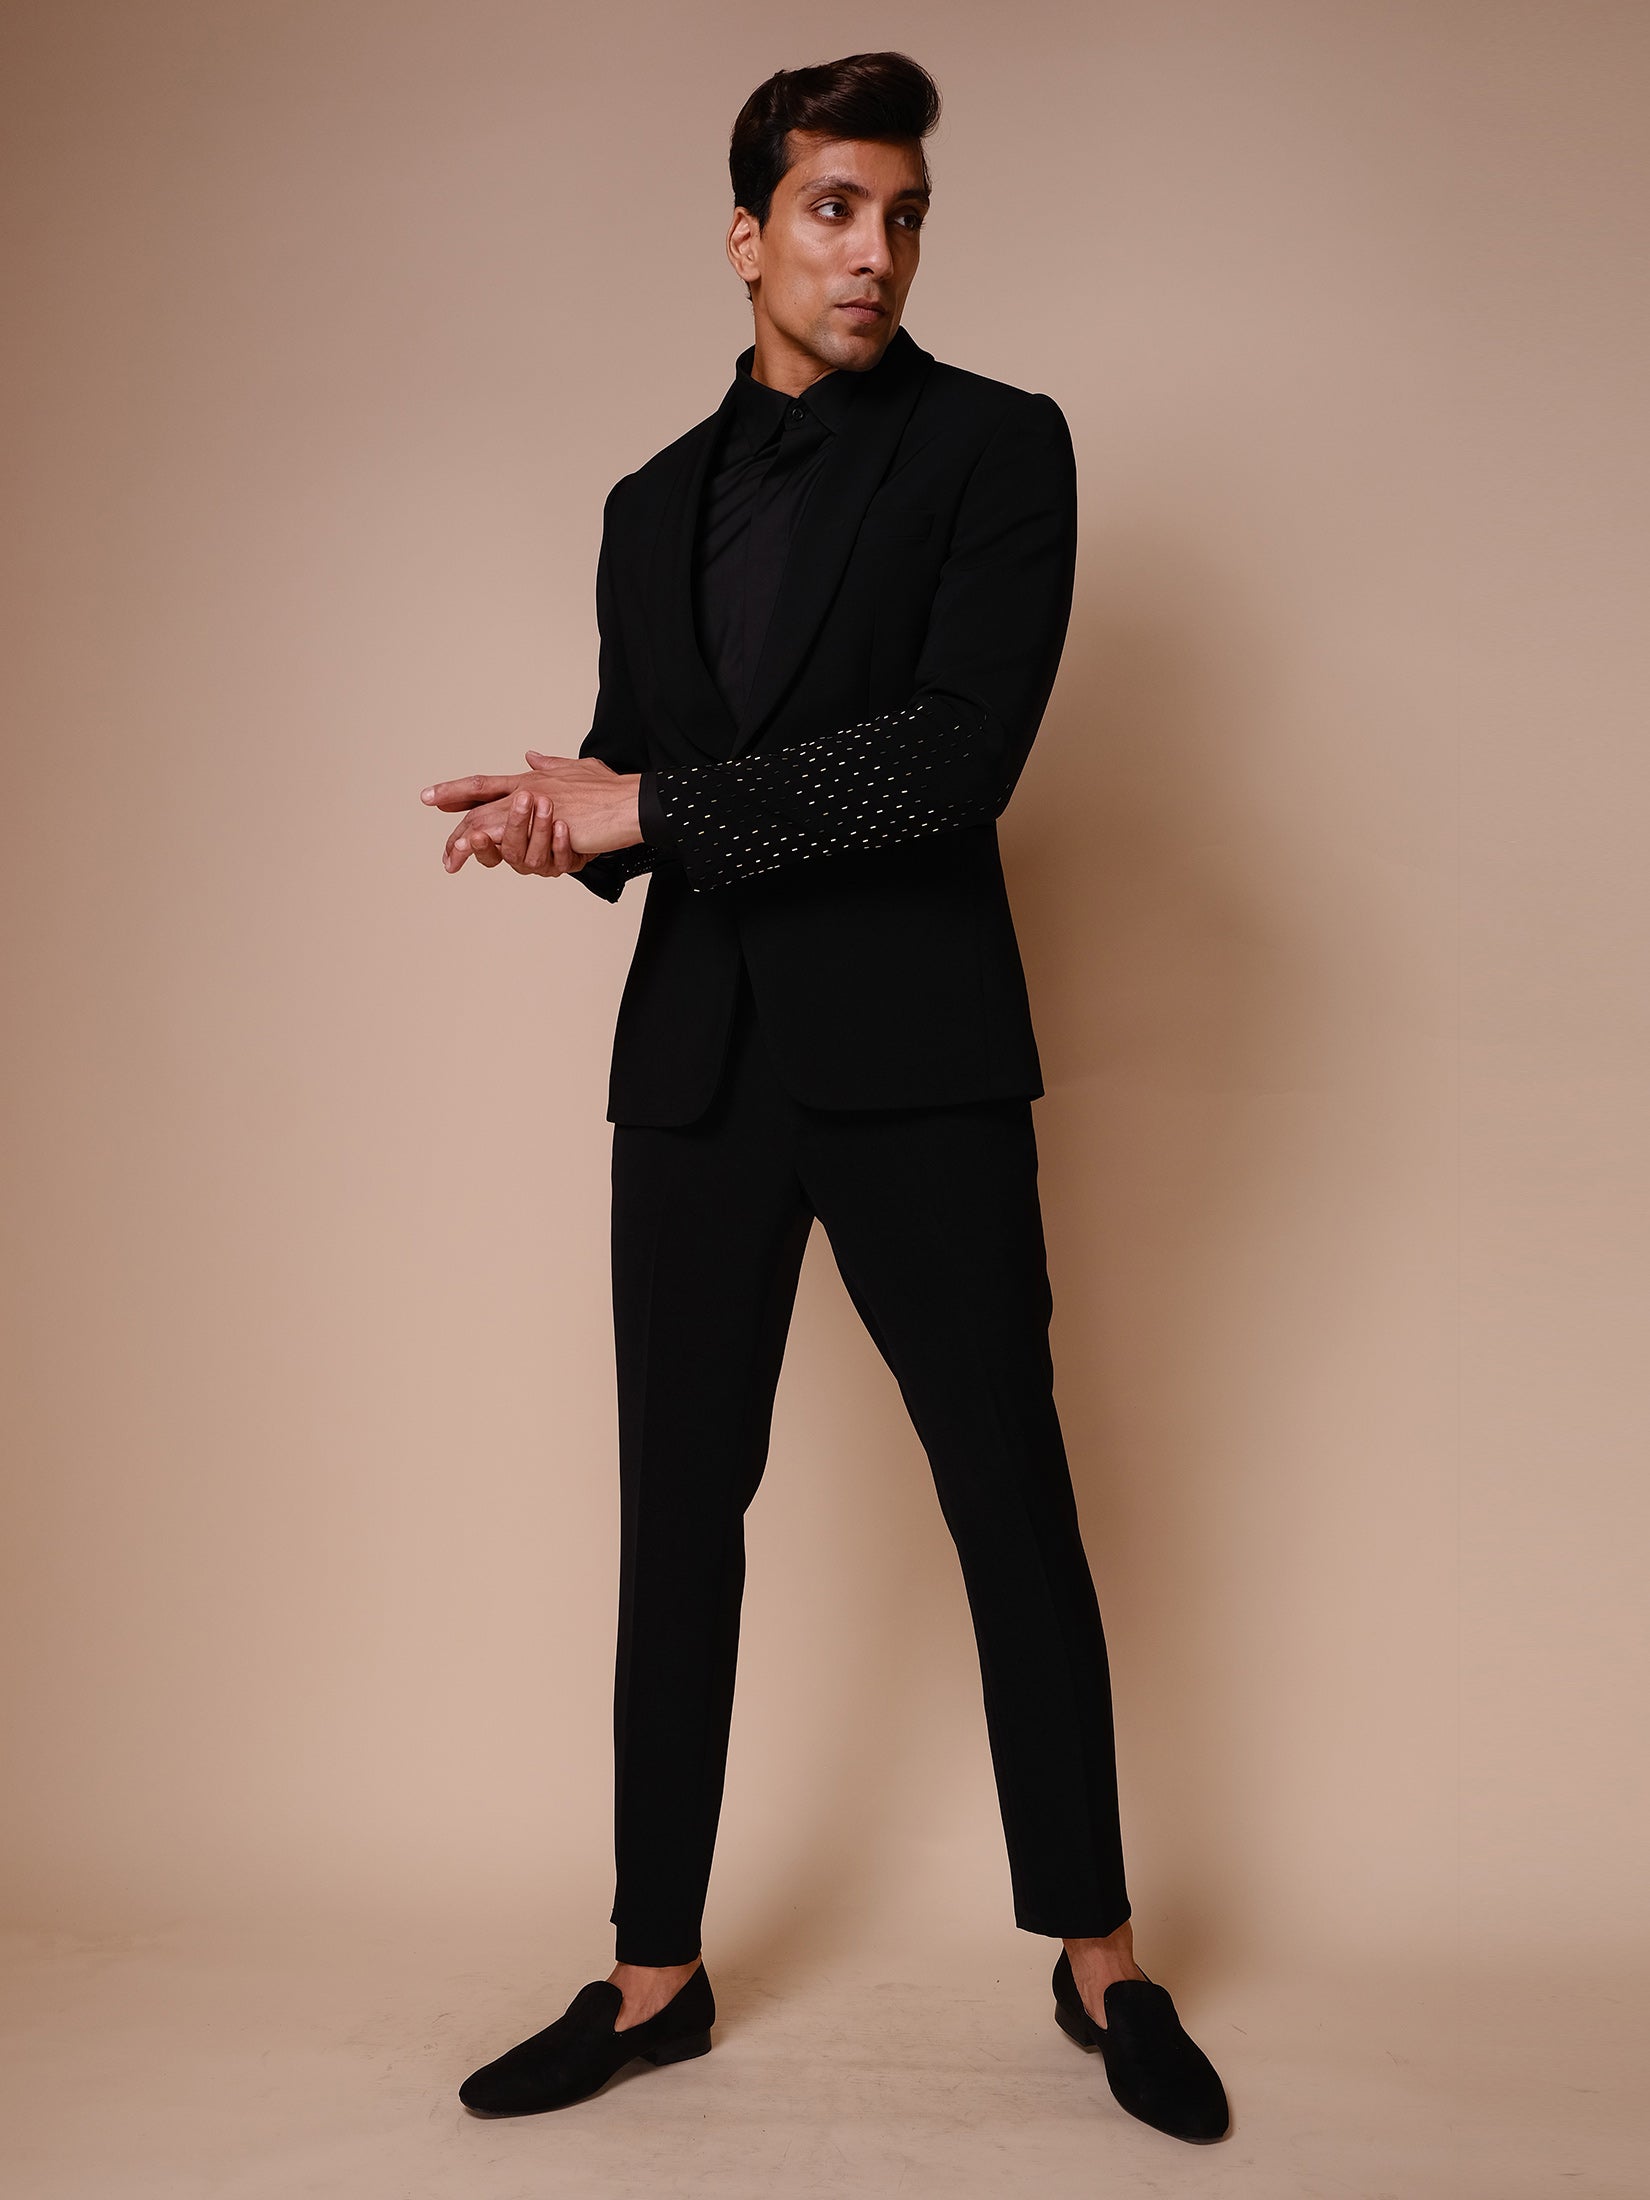 Black Shawl Lapel Tuxedo With Gold Embroidery On Sleeves Paired With Trousers And Tonal Shirt